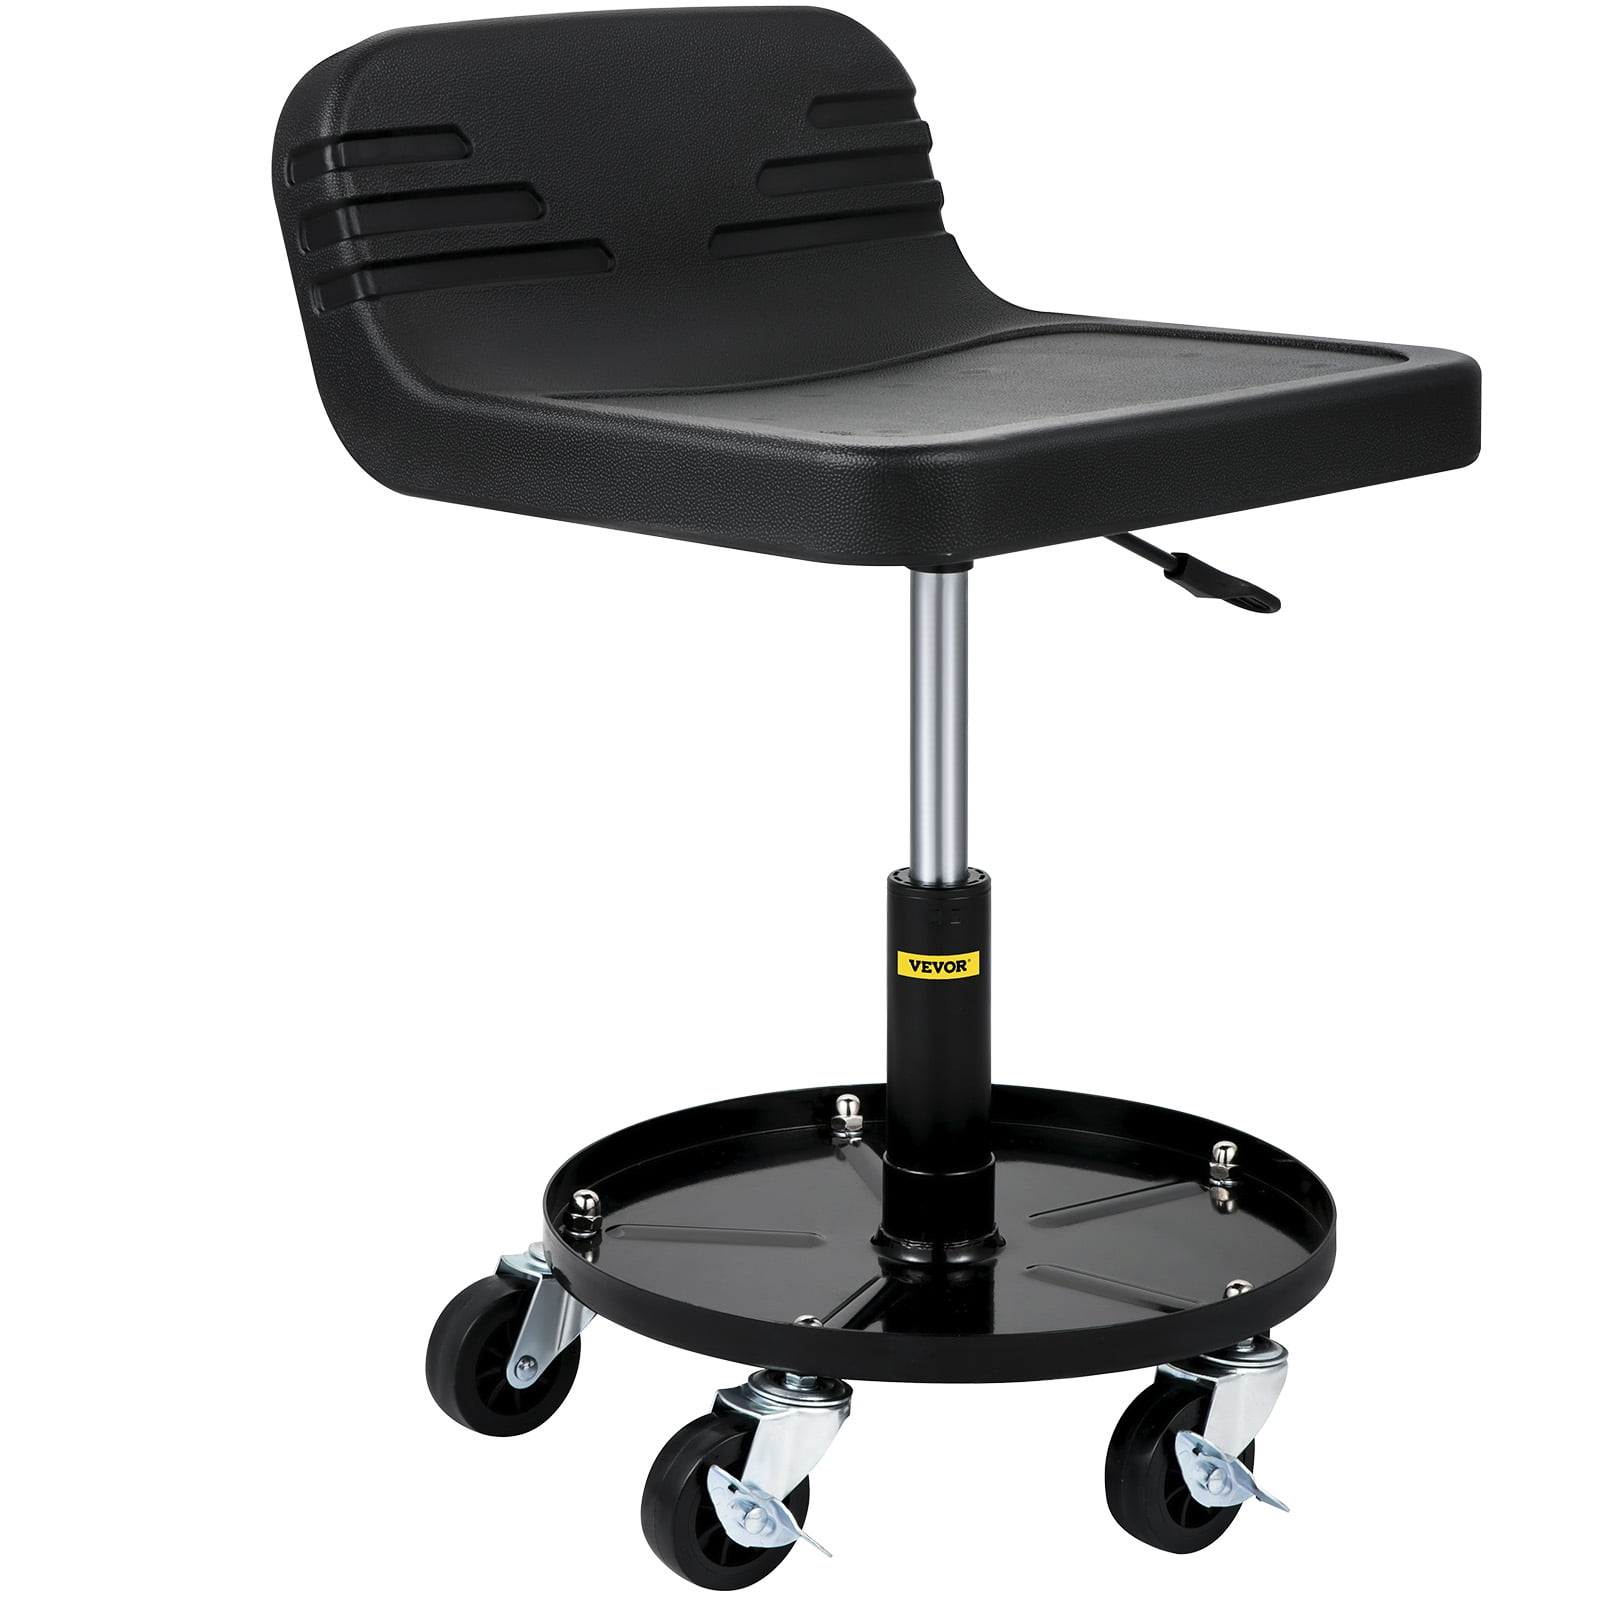 VEVOR Pneumatic Stool,400 LBS Rolling Garage Stool,22” to 26” Adjustable Height Mobile Rolling Gear Seat,Round Shop Stool with Parts Tray,All-Terrain 5 Casters with Two Brakes Mechanic Roller Seat 